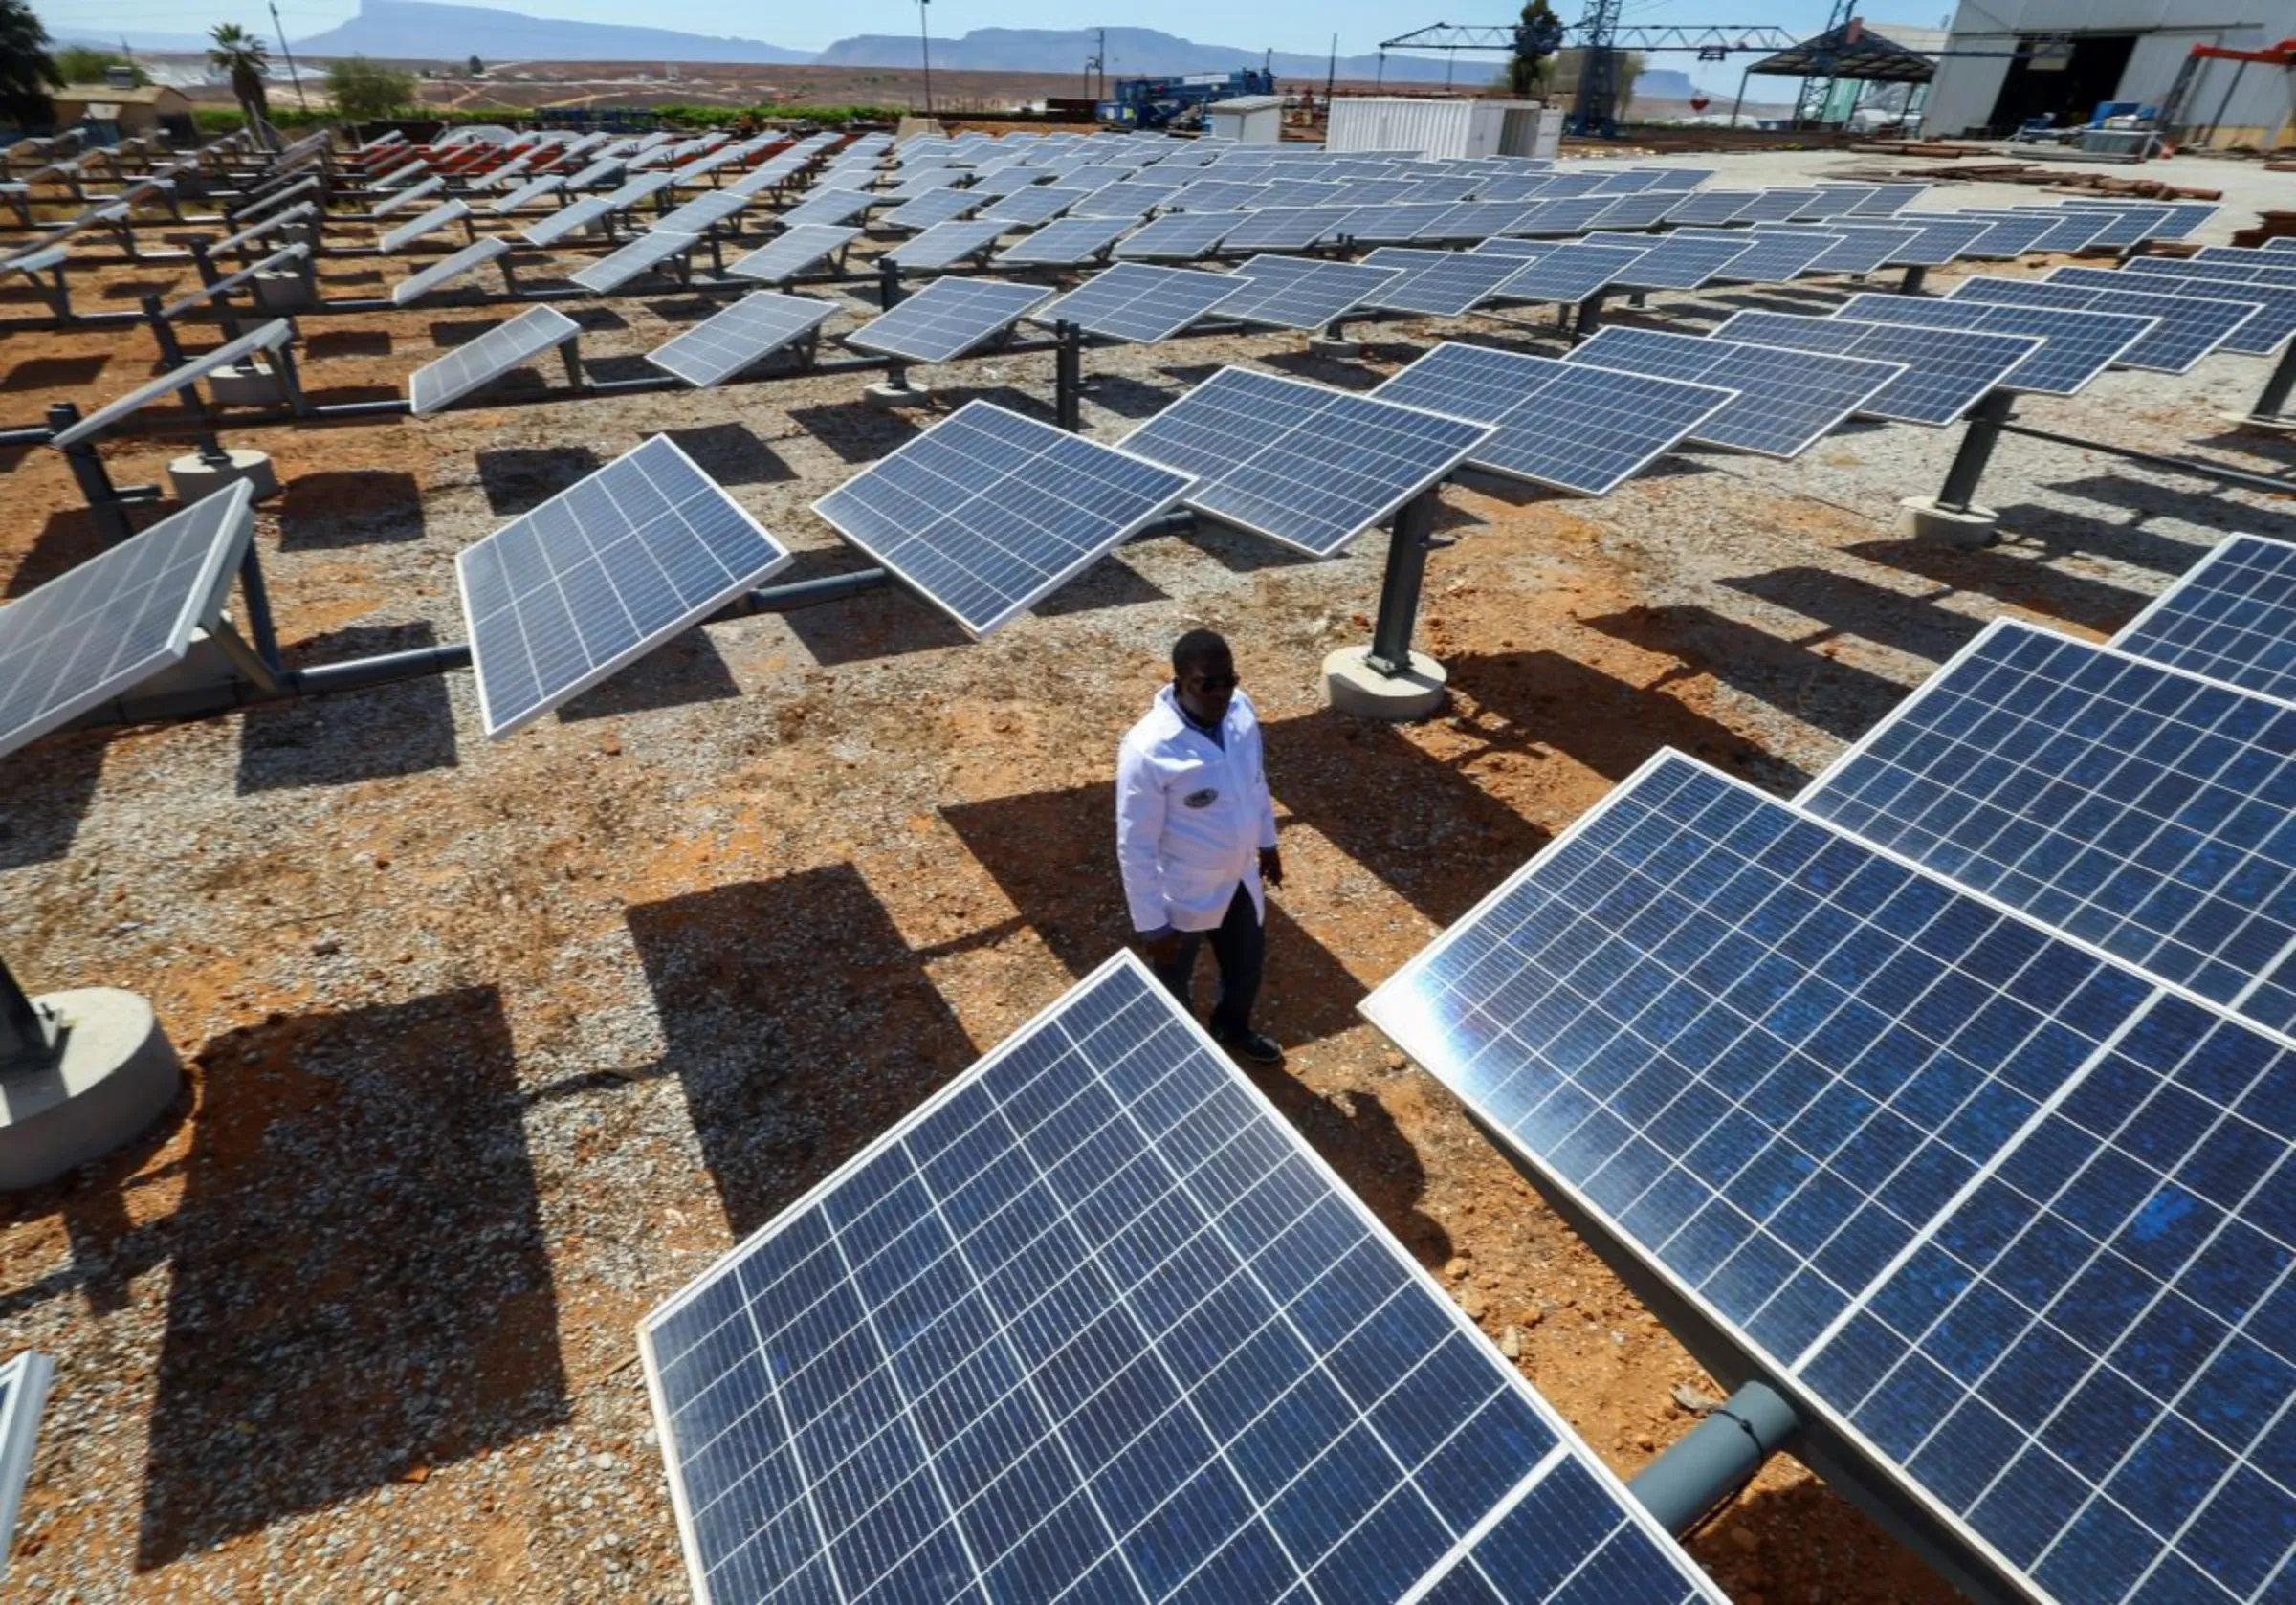 A man looks at the solar panels at the site where Keren Energy constructed the first proof of concept of green hydrogen production facility in Africa at Namaqua Engineering in Vredendal, in collaboration with The Green Hydrogen Institute for Advanced Materials Chemistry (SAIAMC) at the University of the Western Cape, South Africa, November 15, 2022